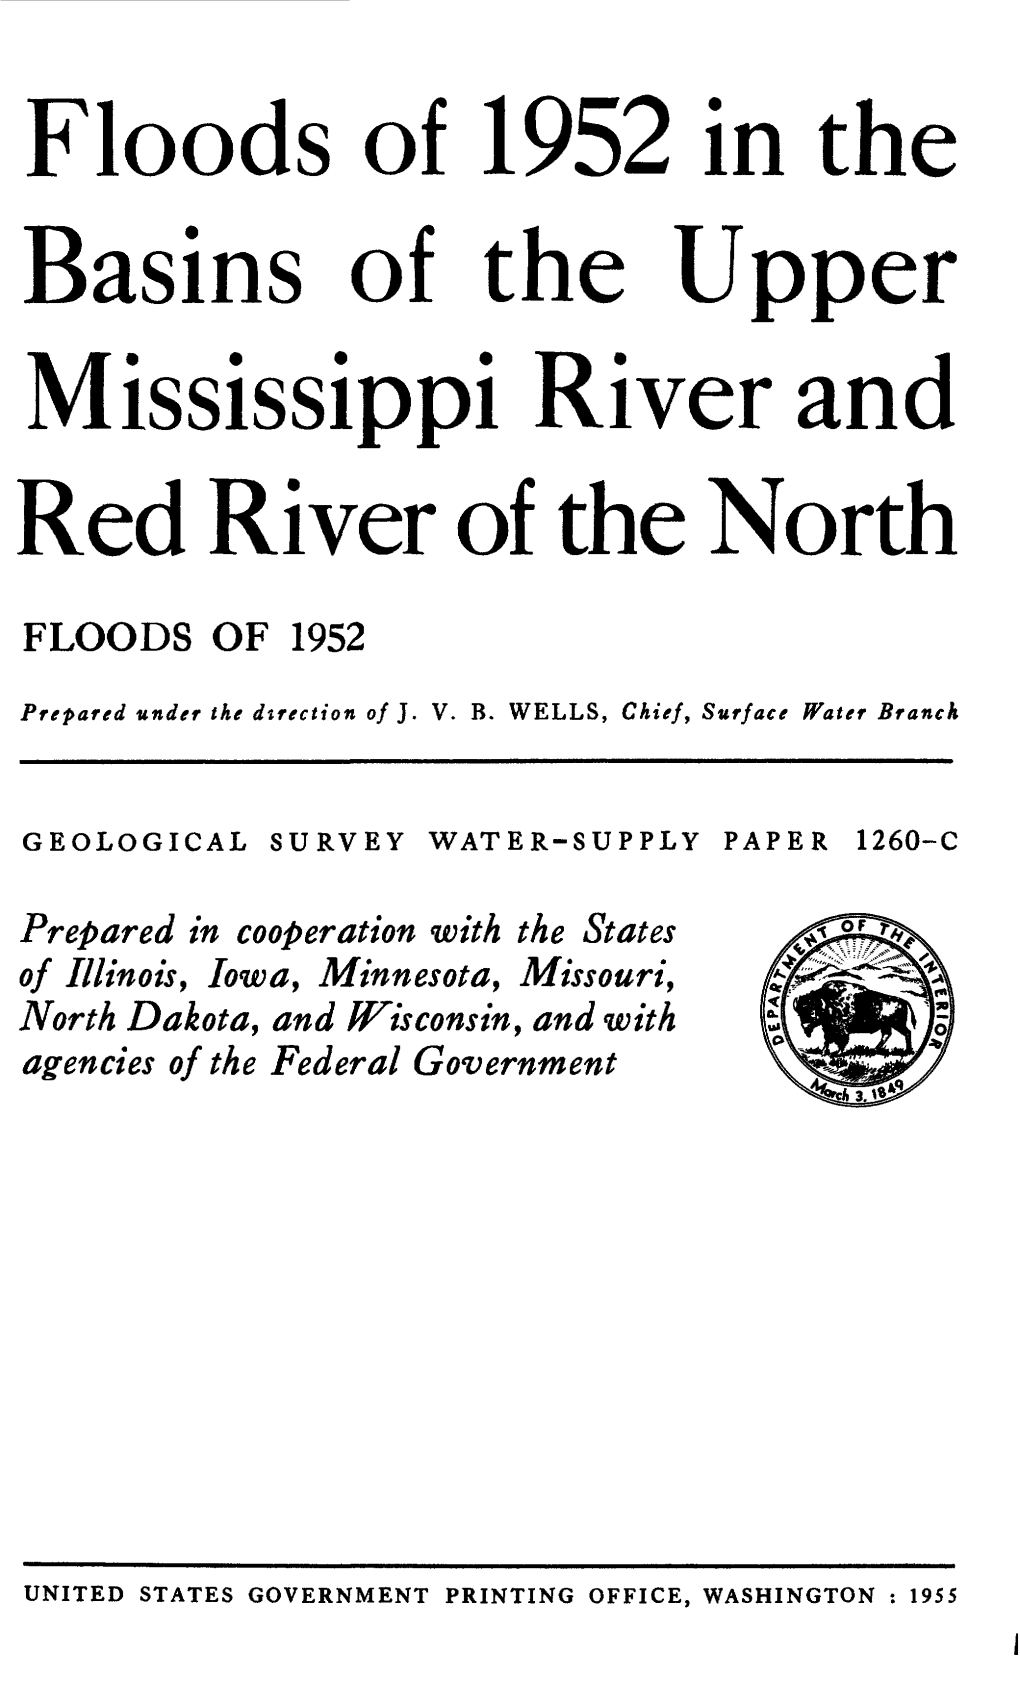 Floods of 1952 in the Basins of the Upper Mississippi River and Red River of the North FLOODS of 1952